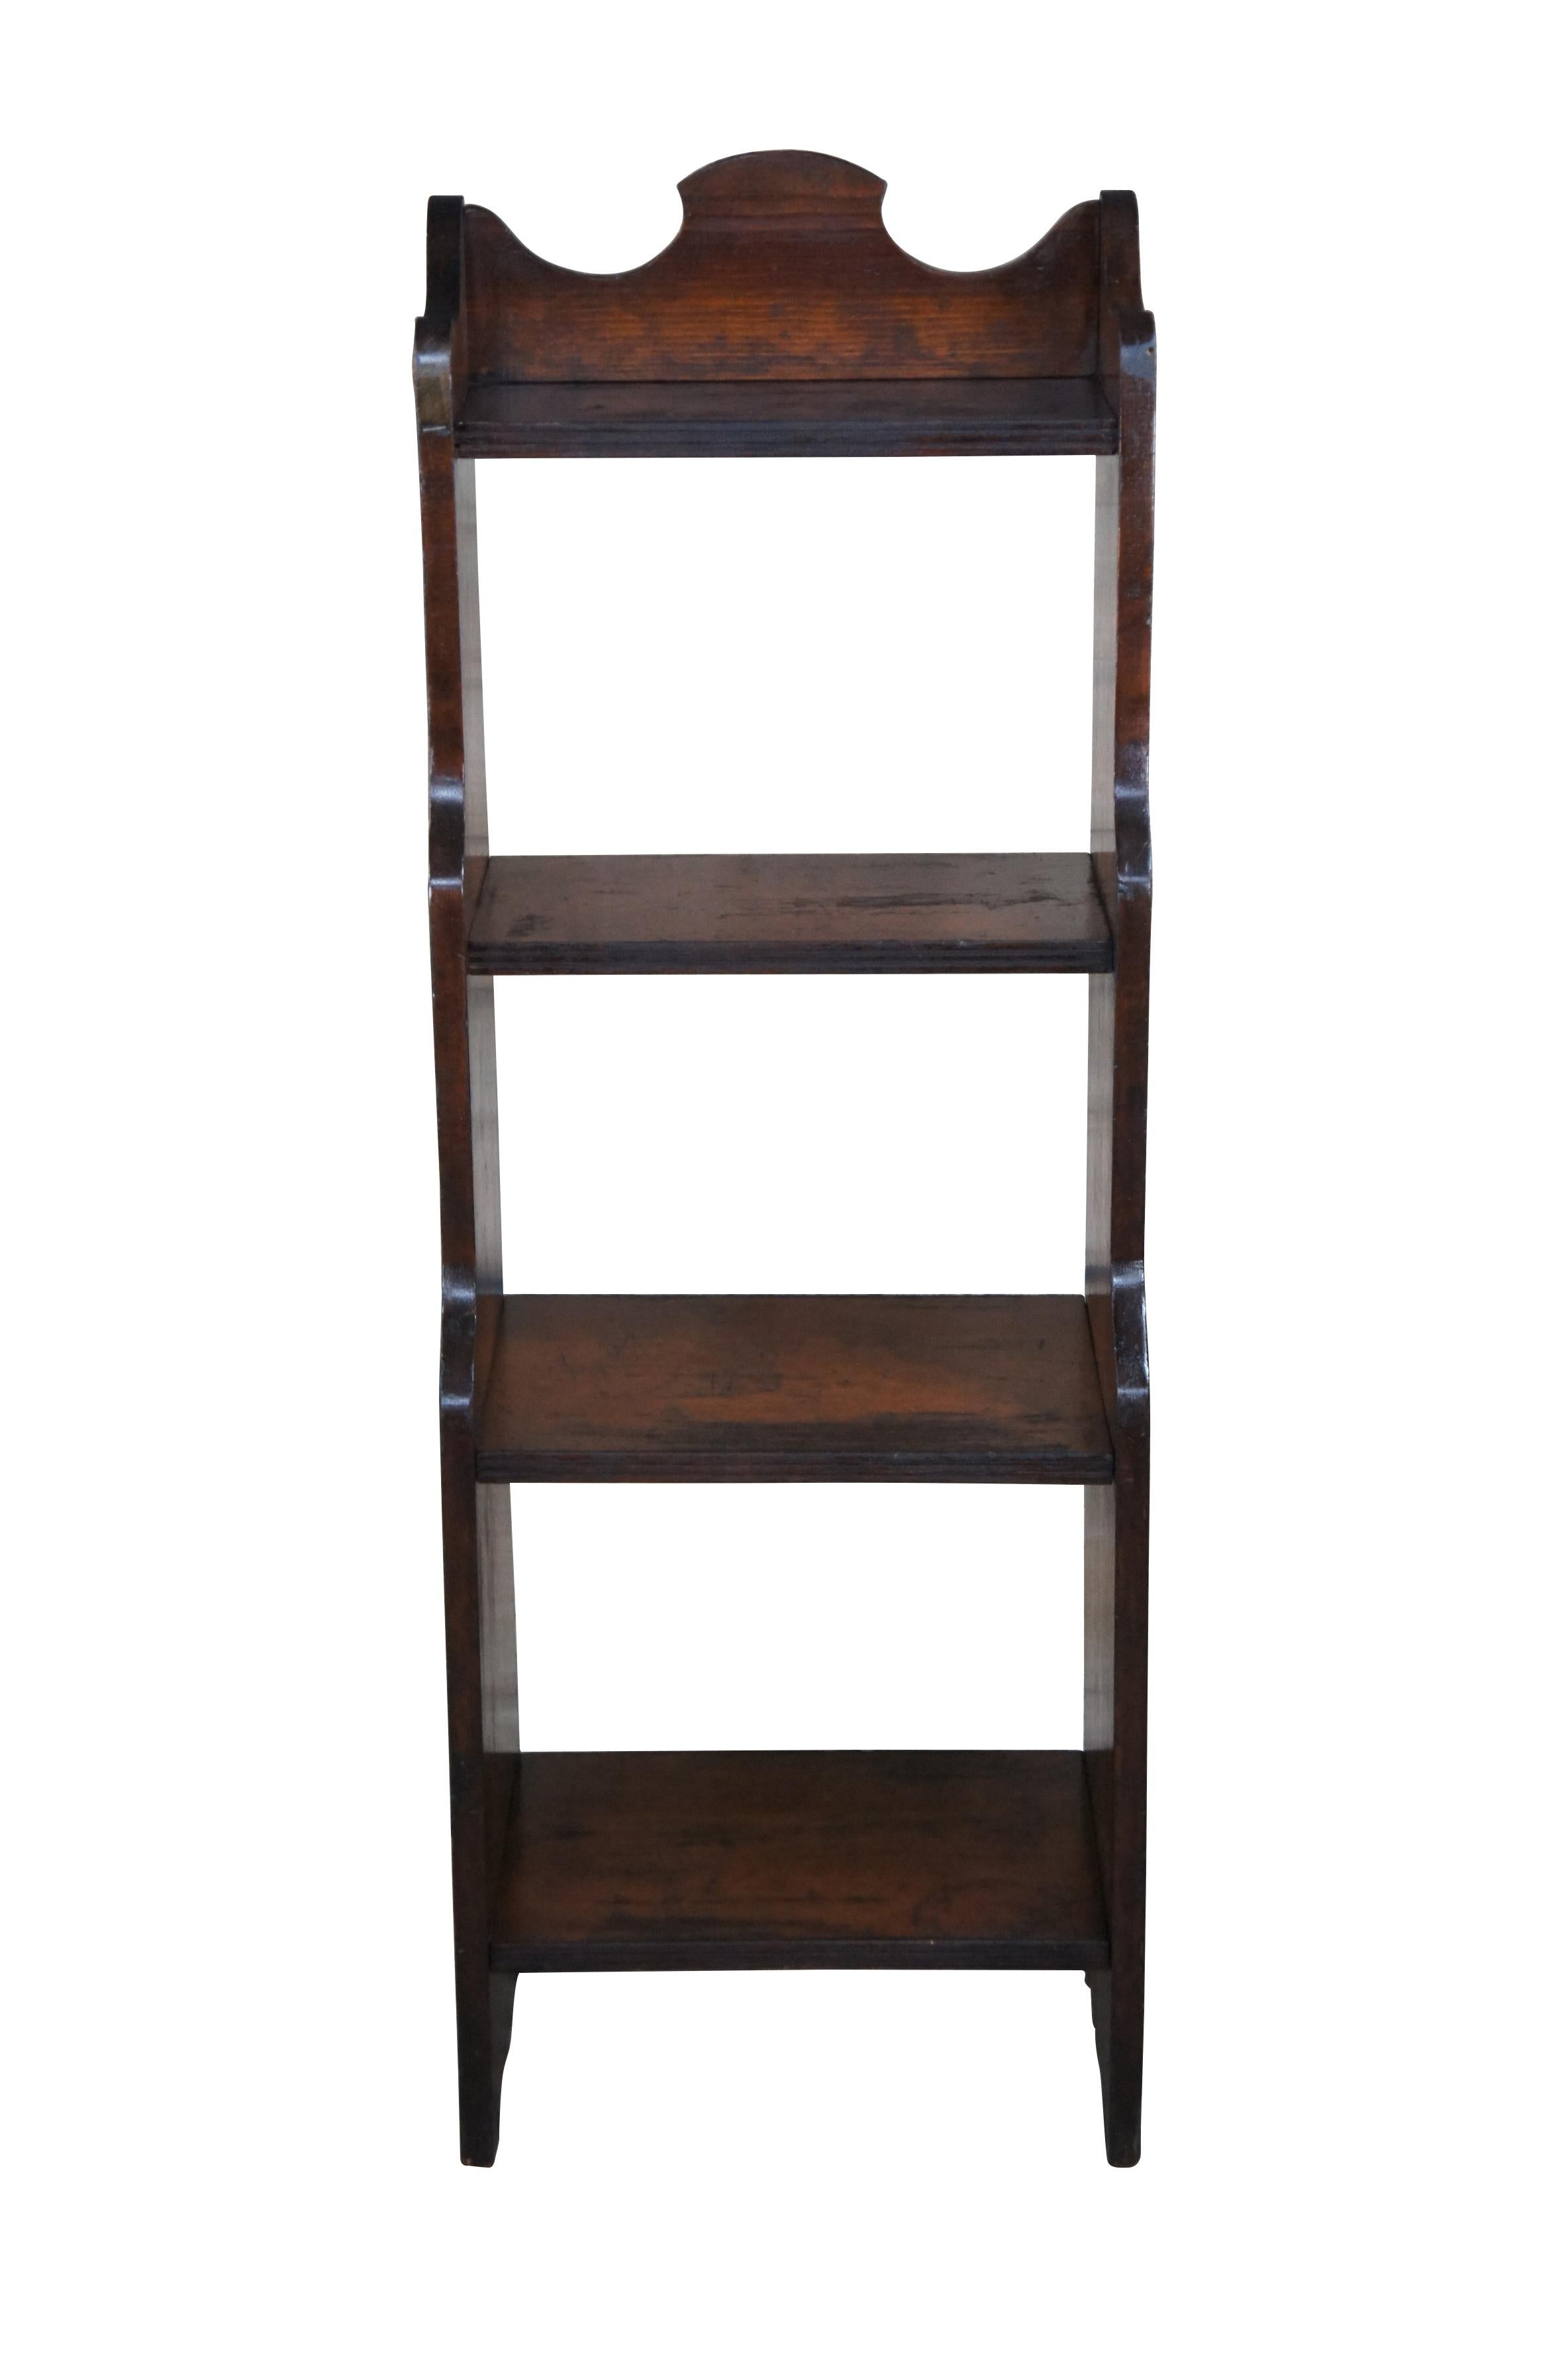 A quaint tiered waterfall bookcase.  Features four shelves and a countoured backsplash.  

Dimensions:
17